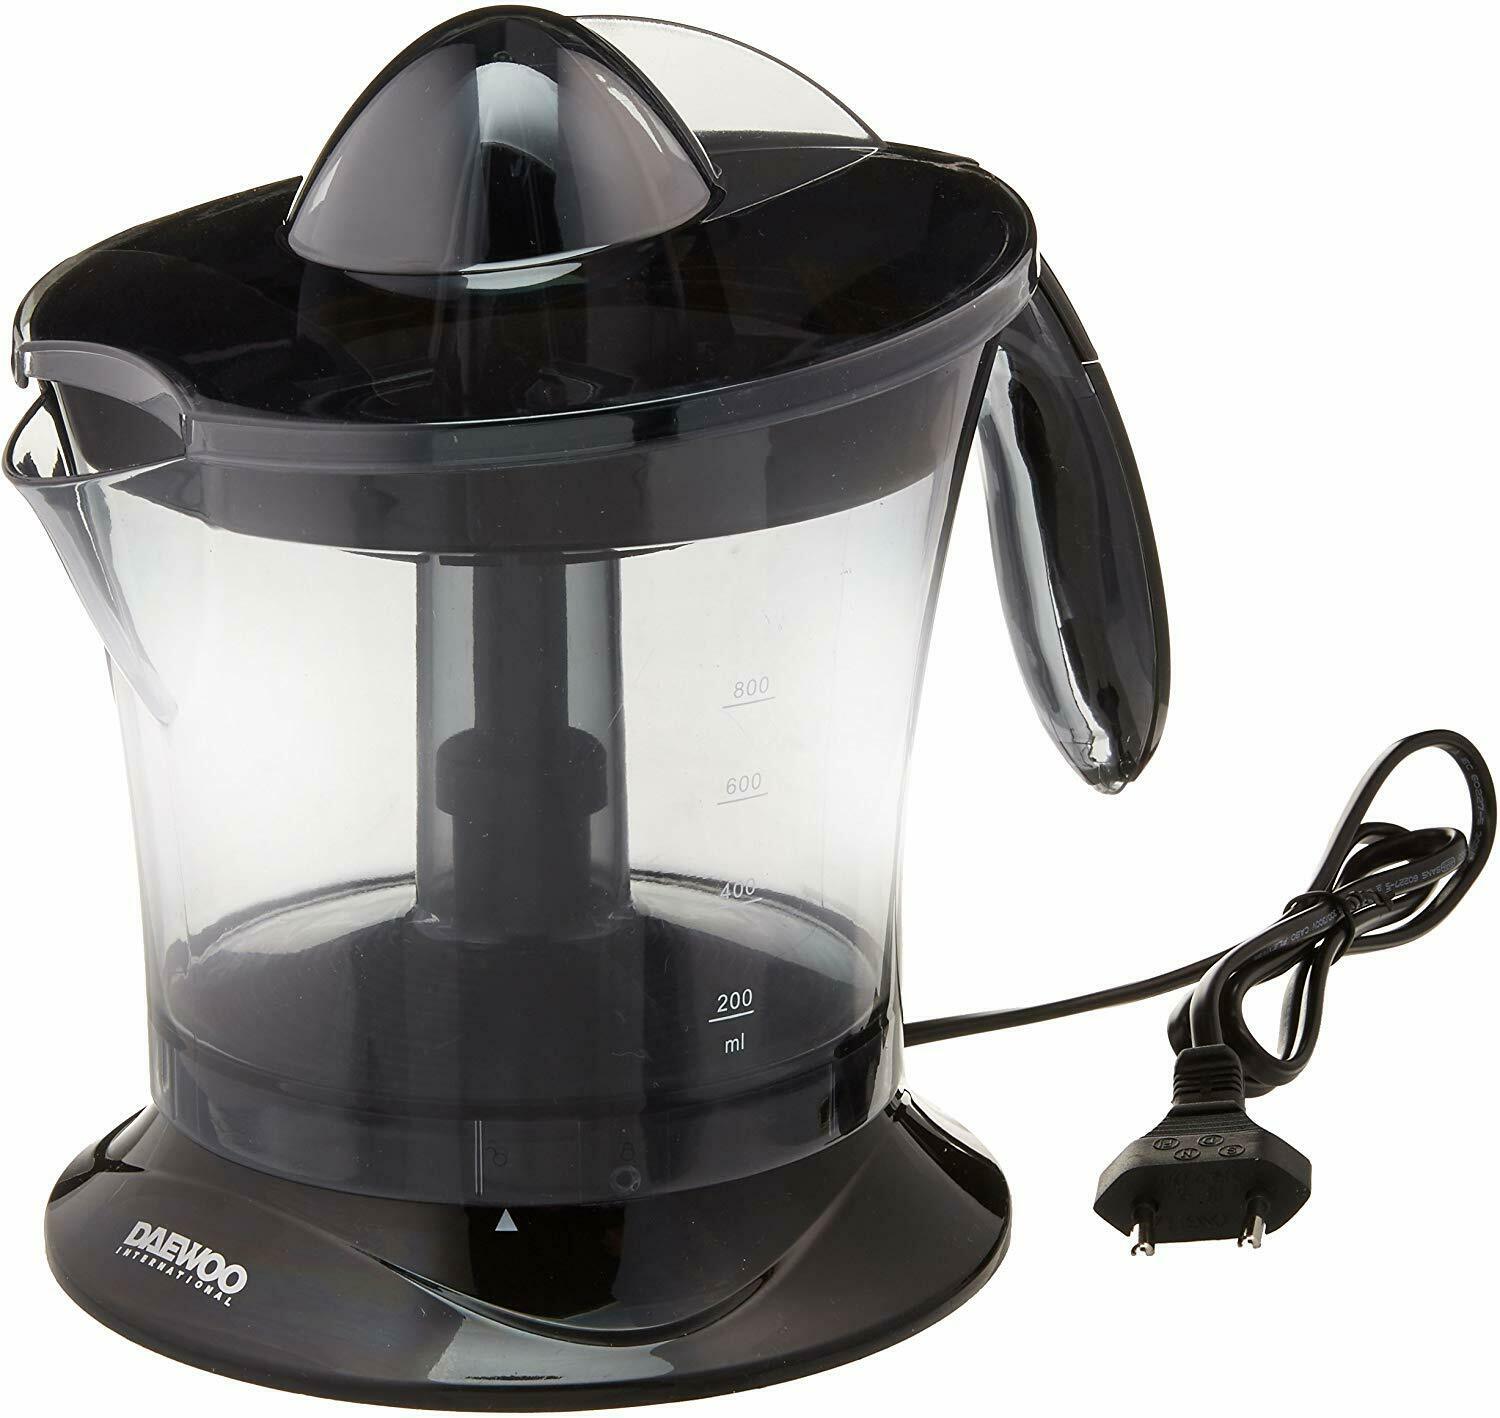 https://www.220stores.com/Shared/Images/Product/Daewoo-DI-8081-220-Volt-Citrus-Juicer-220v-Voltage-For-Export-to-Europe-Asia-Africa/DI8081.jpg